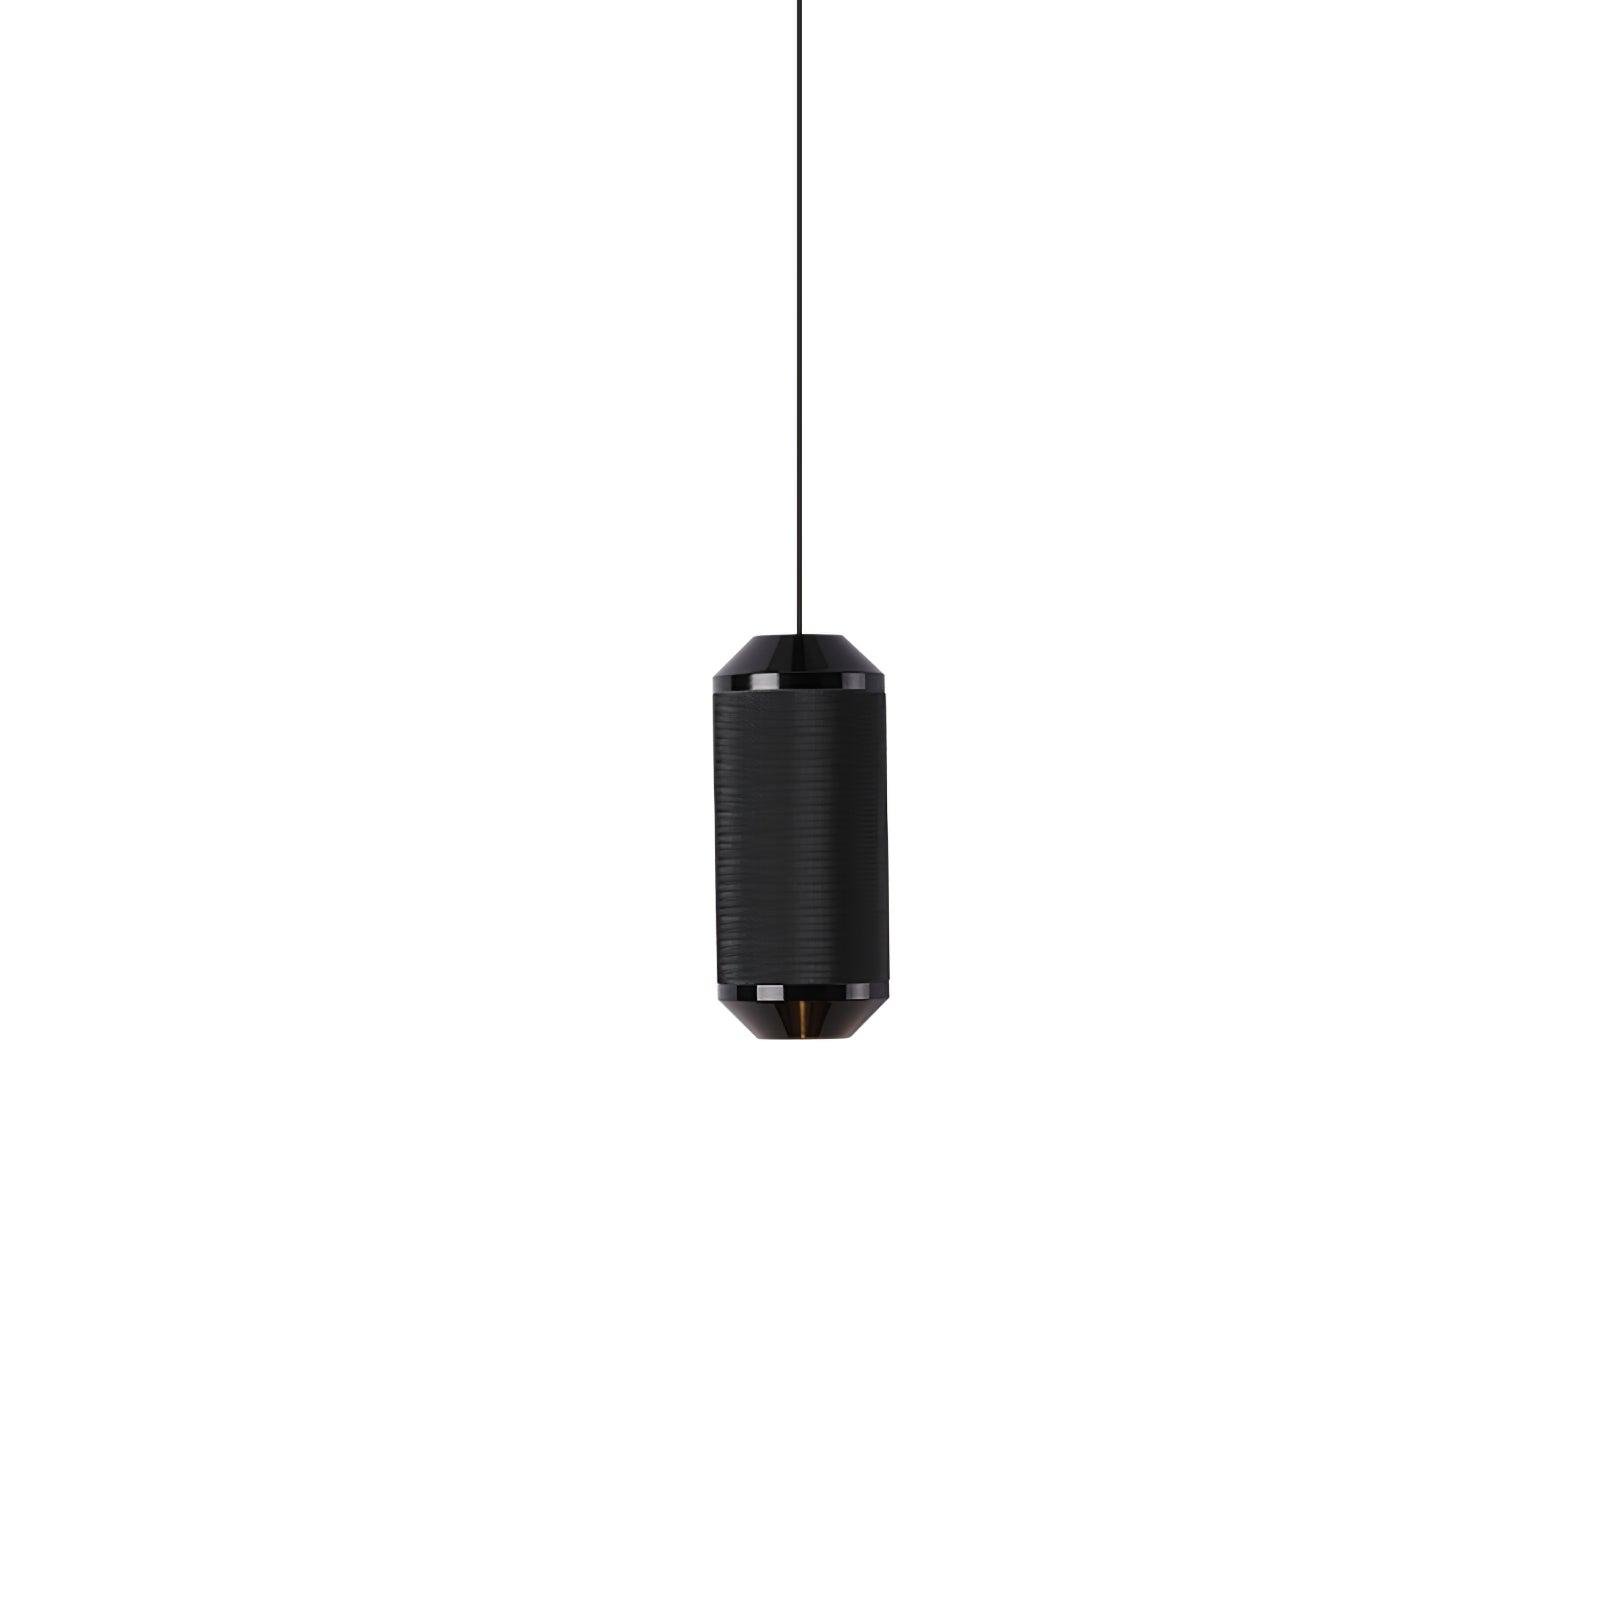 Black Backbeat Pendant Lamp with a diameter of 17.7" and a height of 11.8", or a diameter of 7.5cm and a height of 18cm, emitting a cool light.